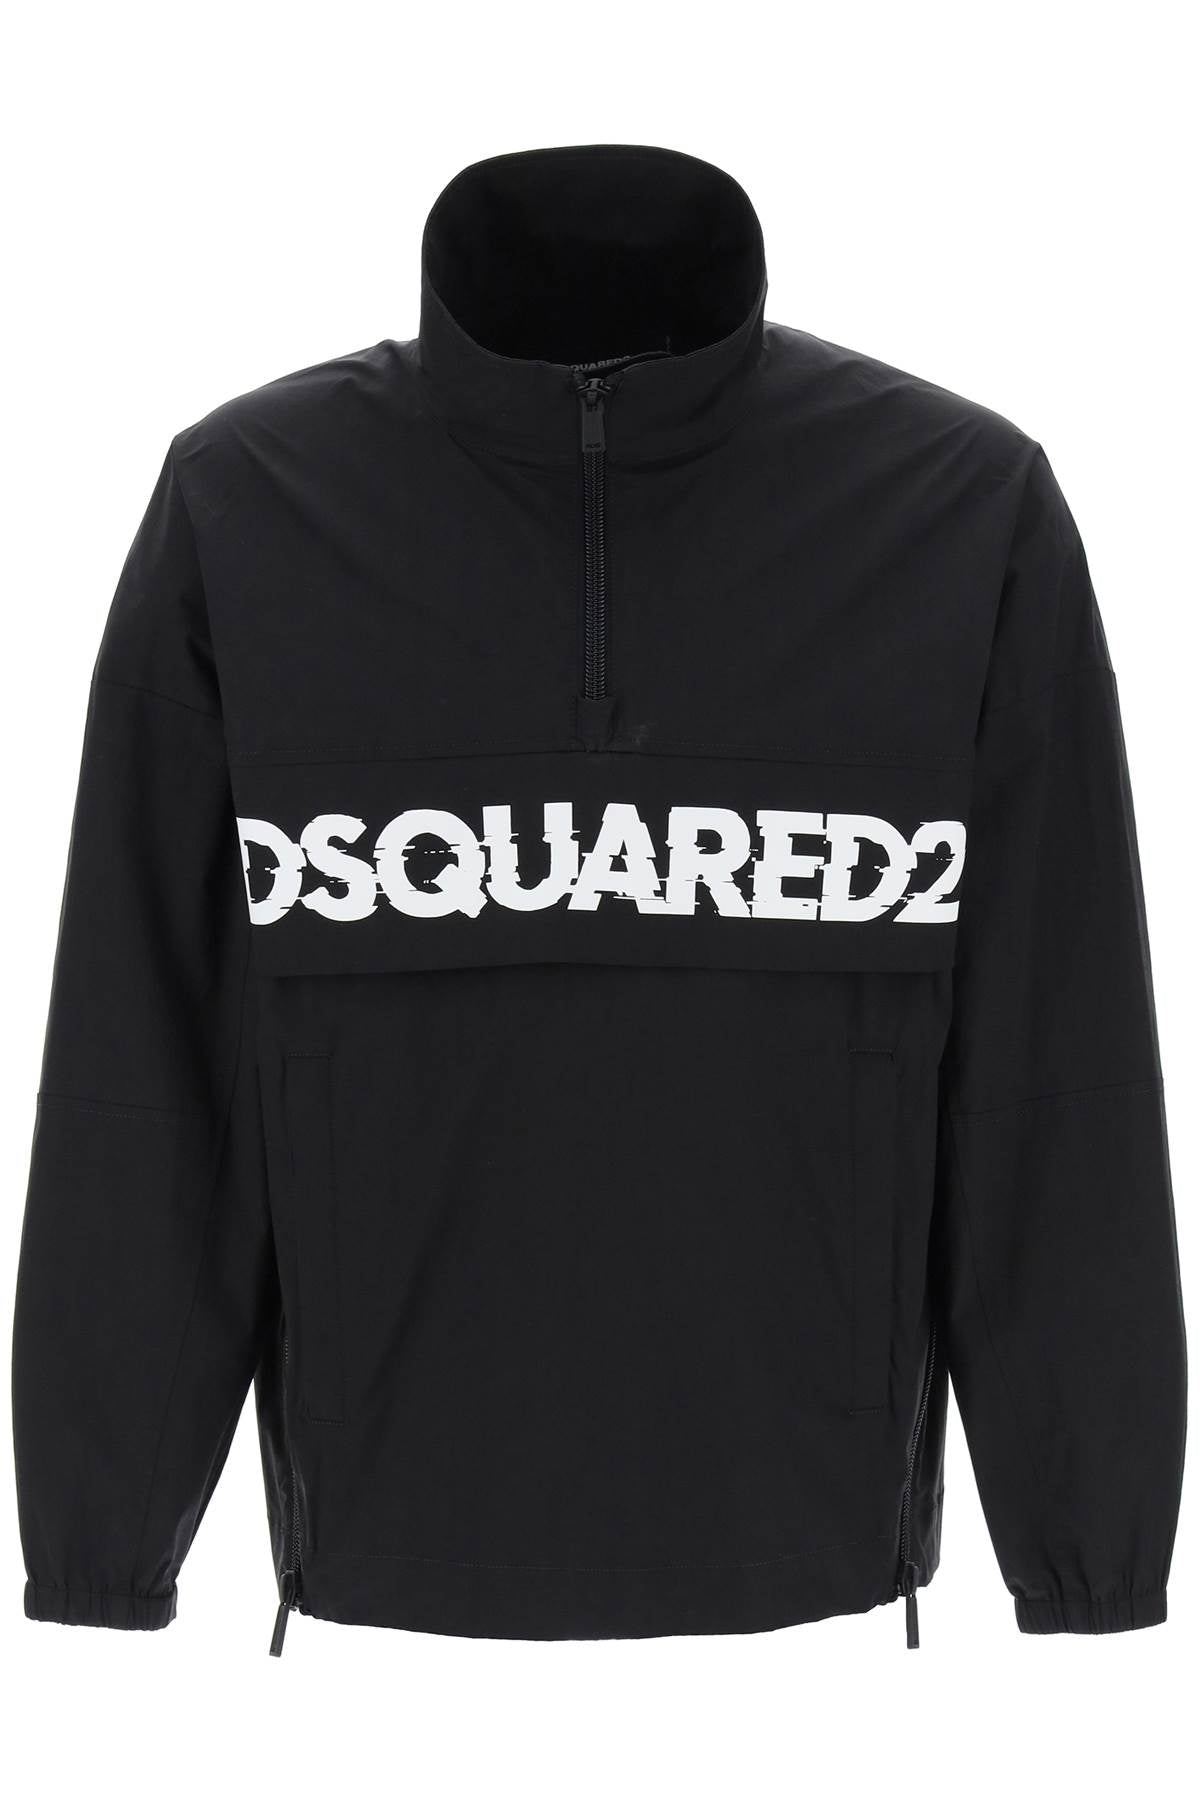 Dsquared2 anorak with logo print – Italy Station